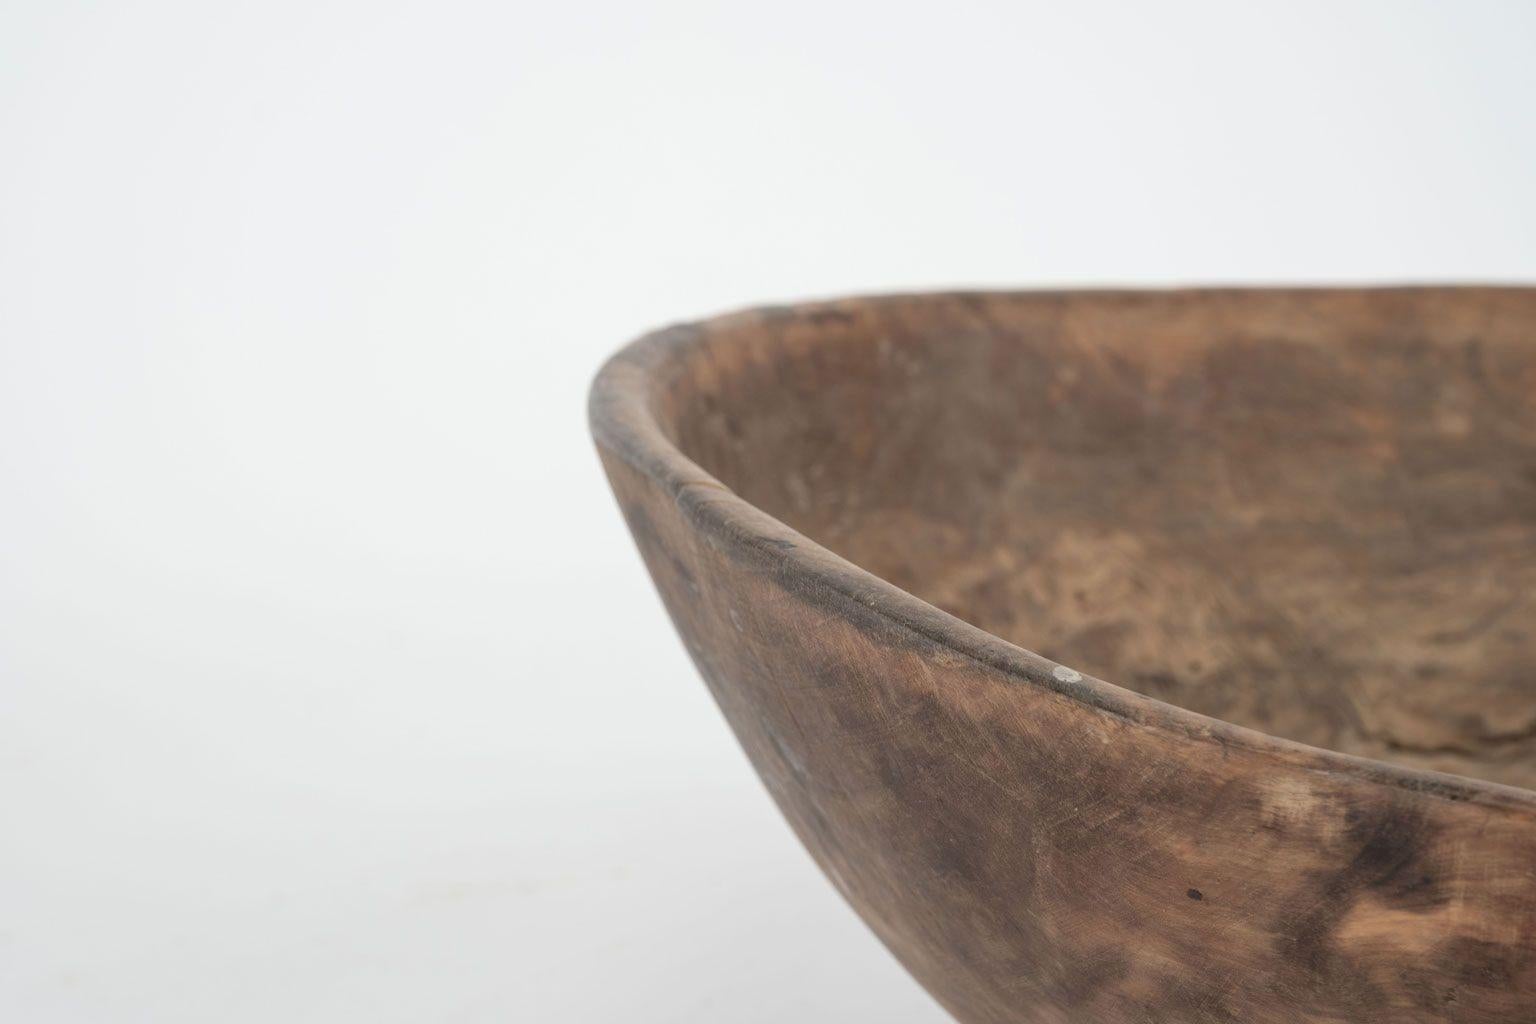 Round hand carved Swedish root wood bowl, dating to 19th century. Retains remnants of early paint, markings and beautiful burled root grain.